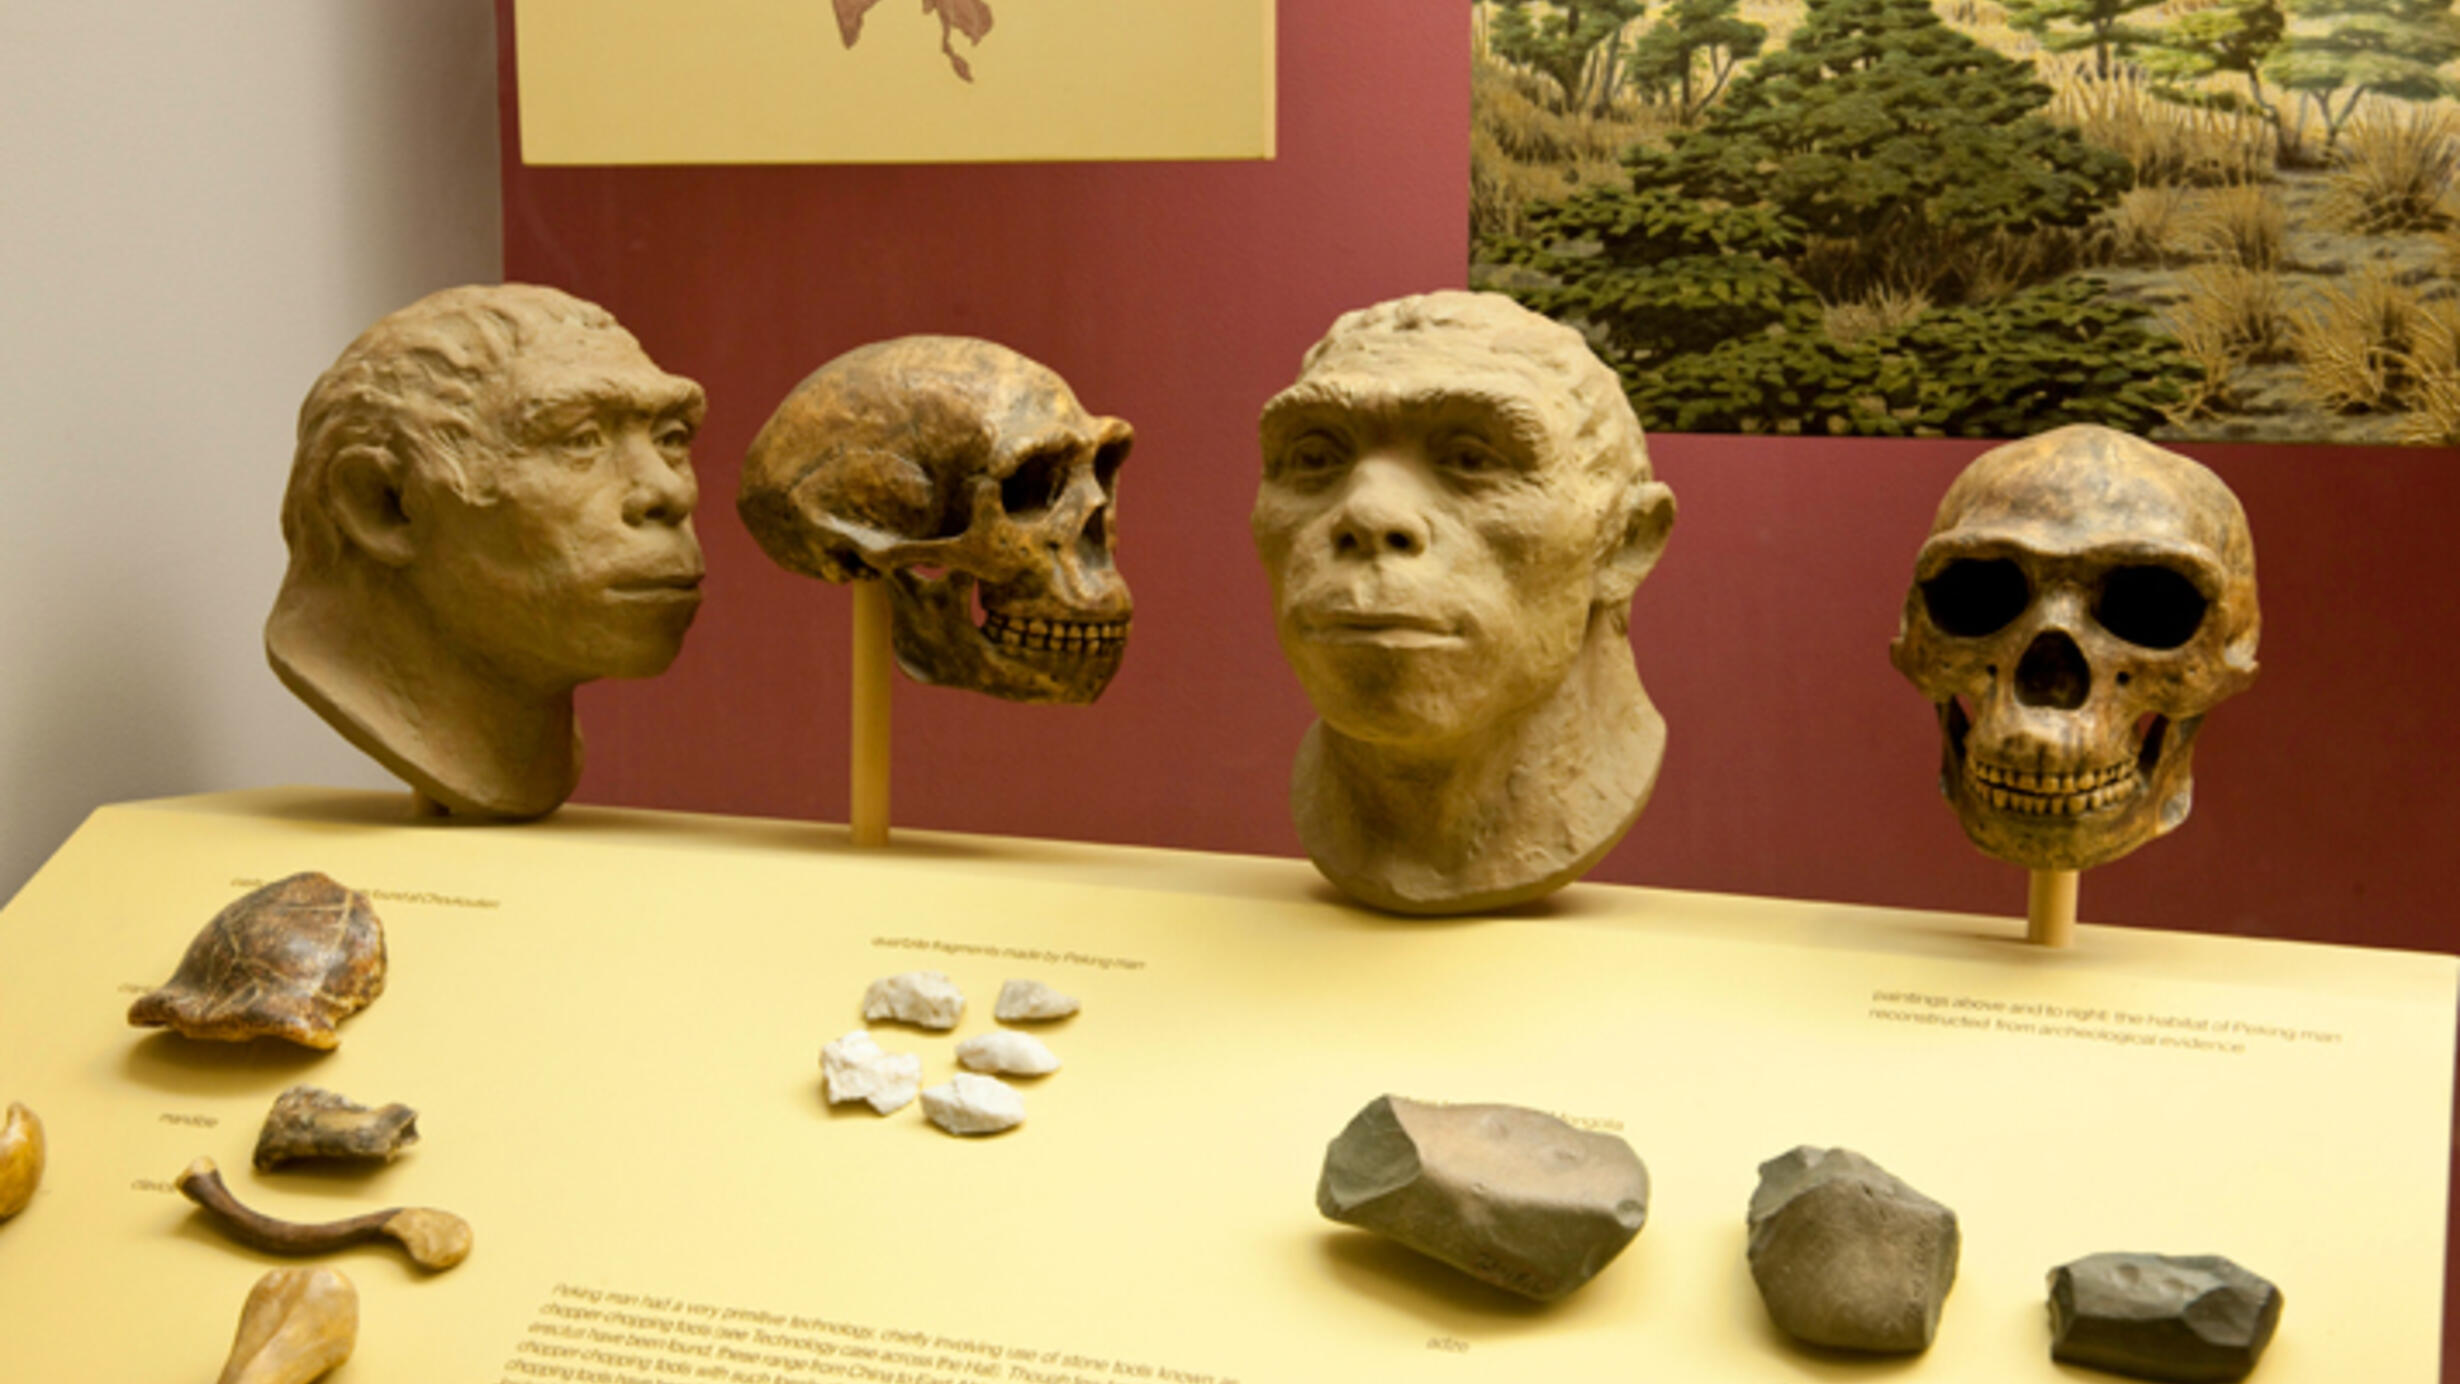 In an exhibition case, several small stone tools, two hominid skulls, and two hominid facial reproductions.